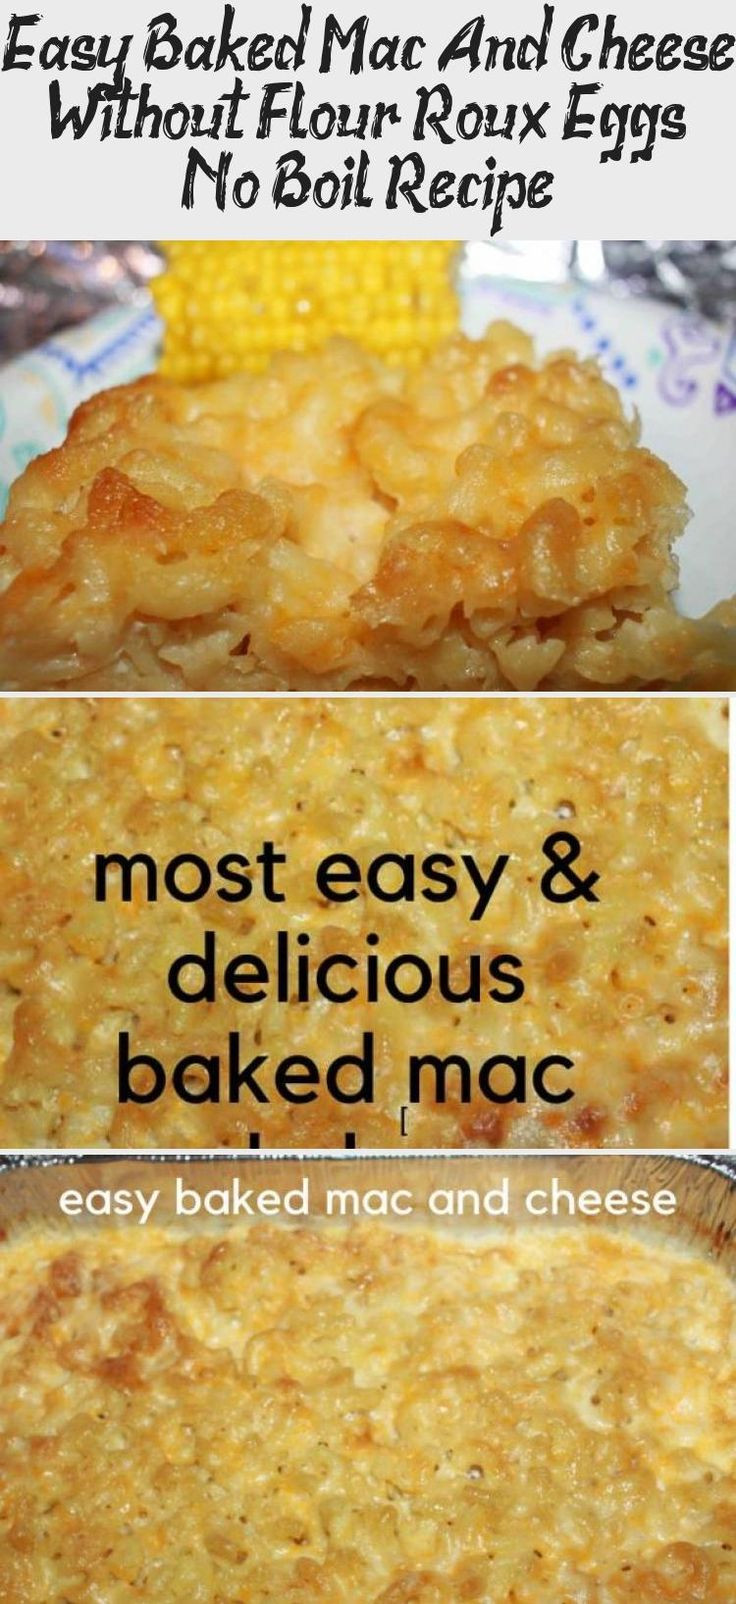 easy mac and cheese no roux